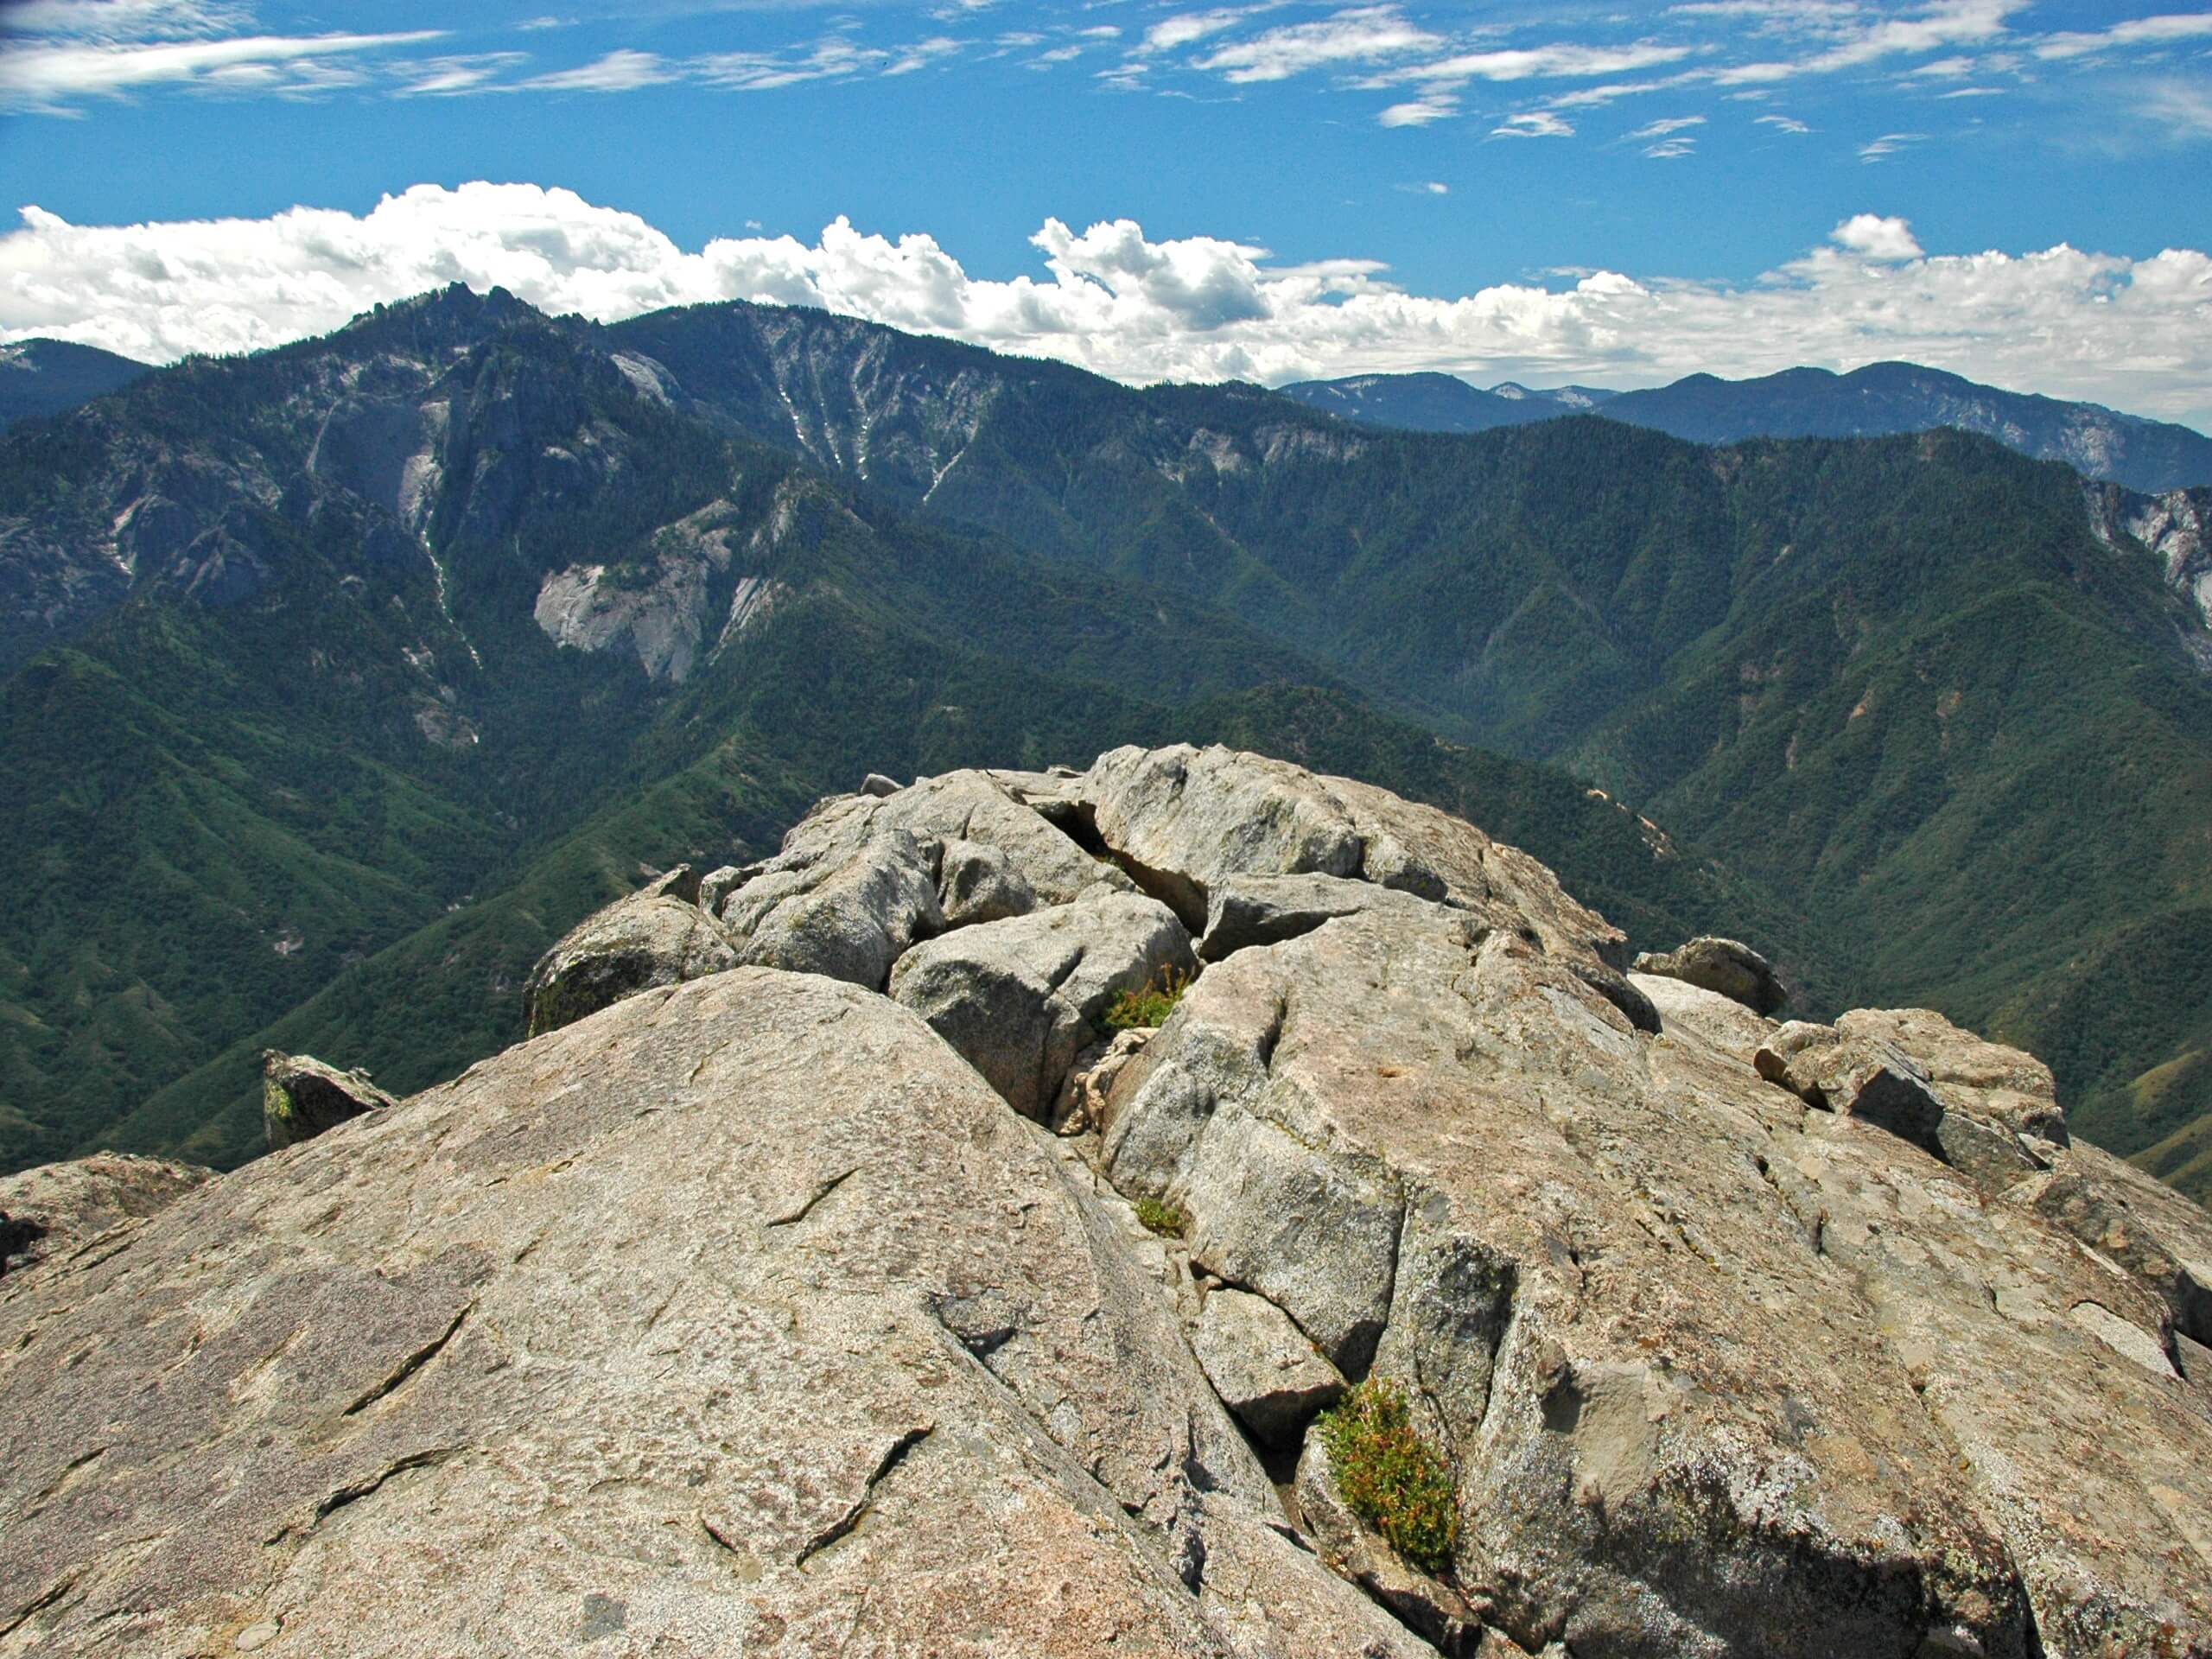 Moro Rock, Eagle View, and Huckleberry Loop Hike